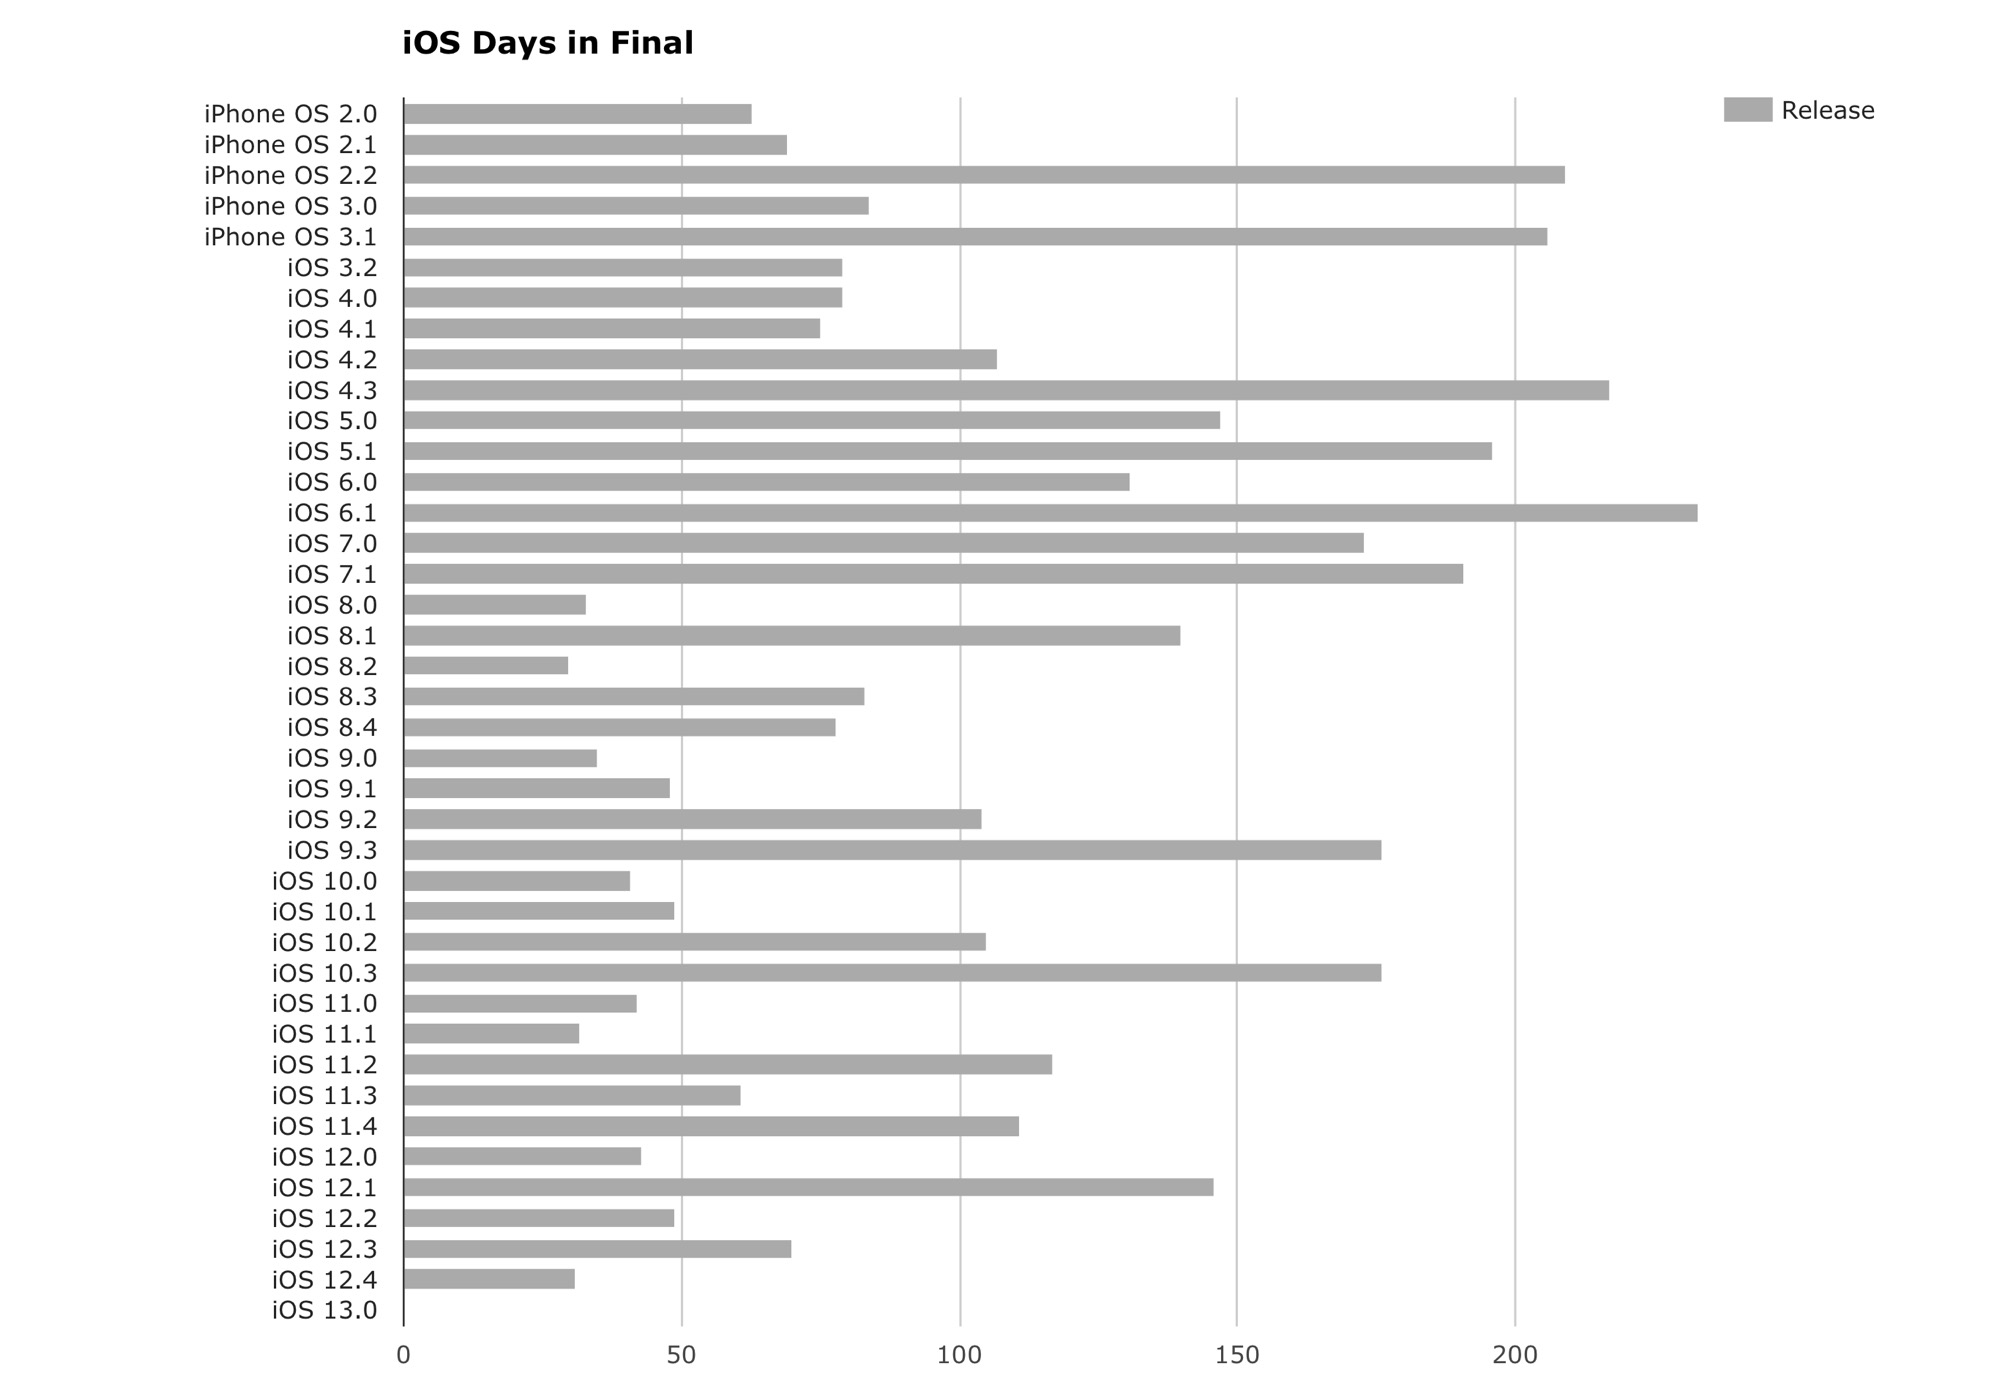 How many days did each final iOS version last before being replaced?